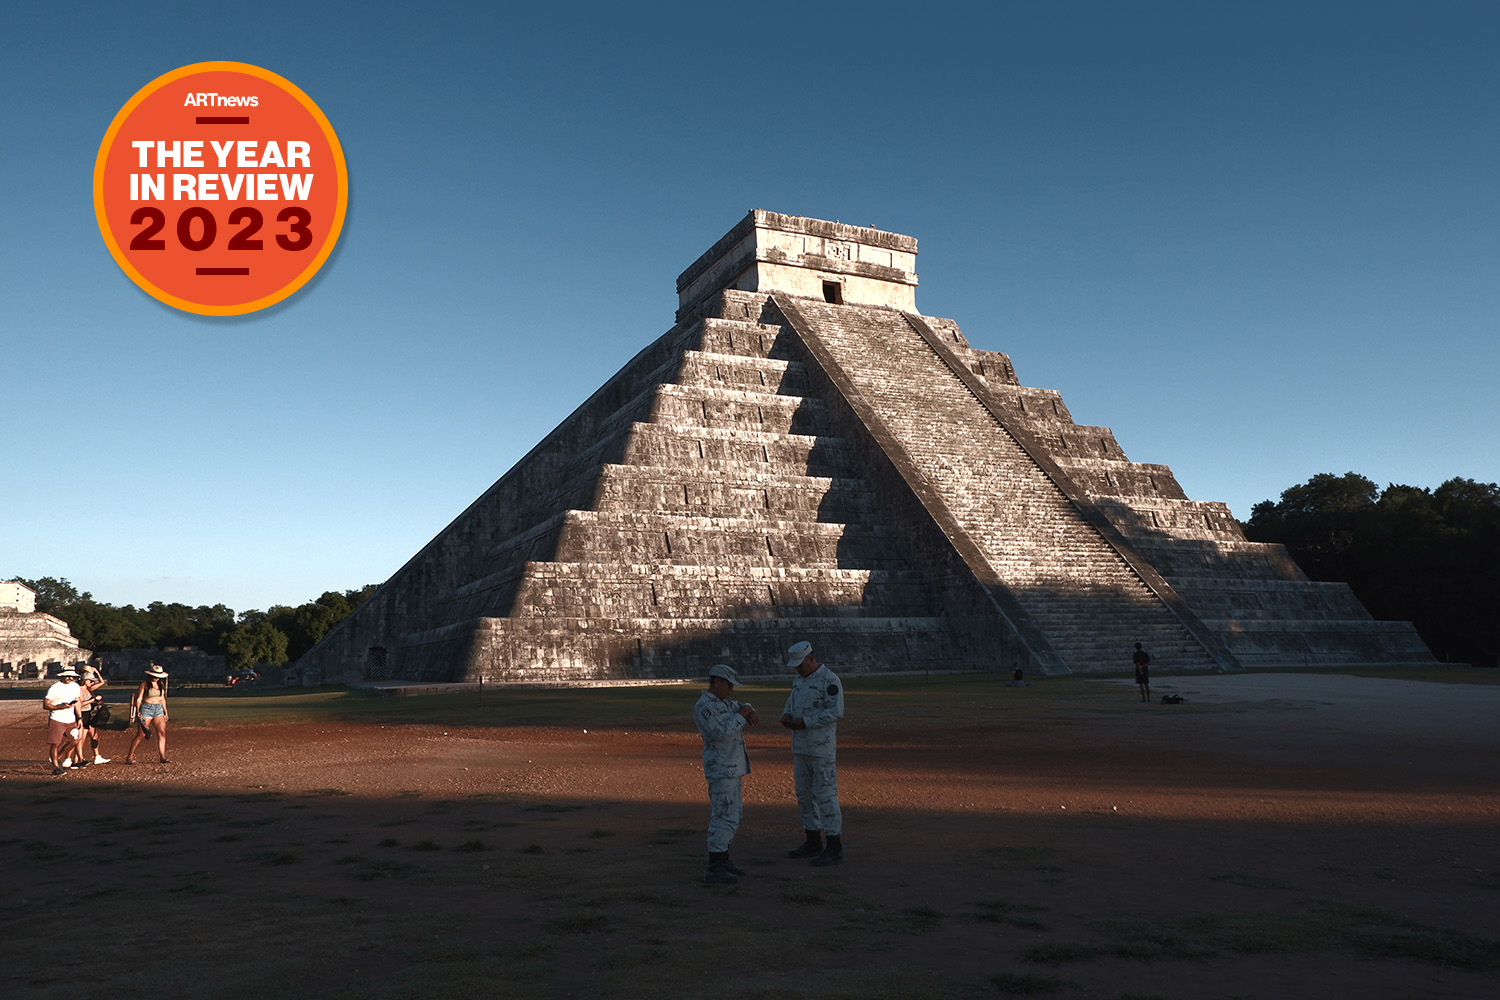 The pyramid complex of Chichen Itza is seen near sunset with tourists standing in front.